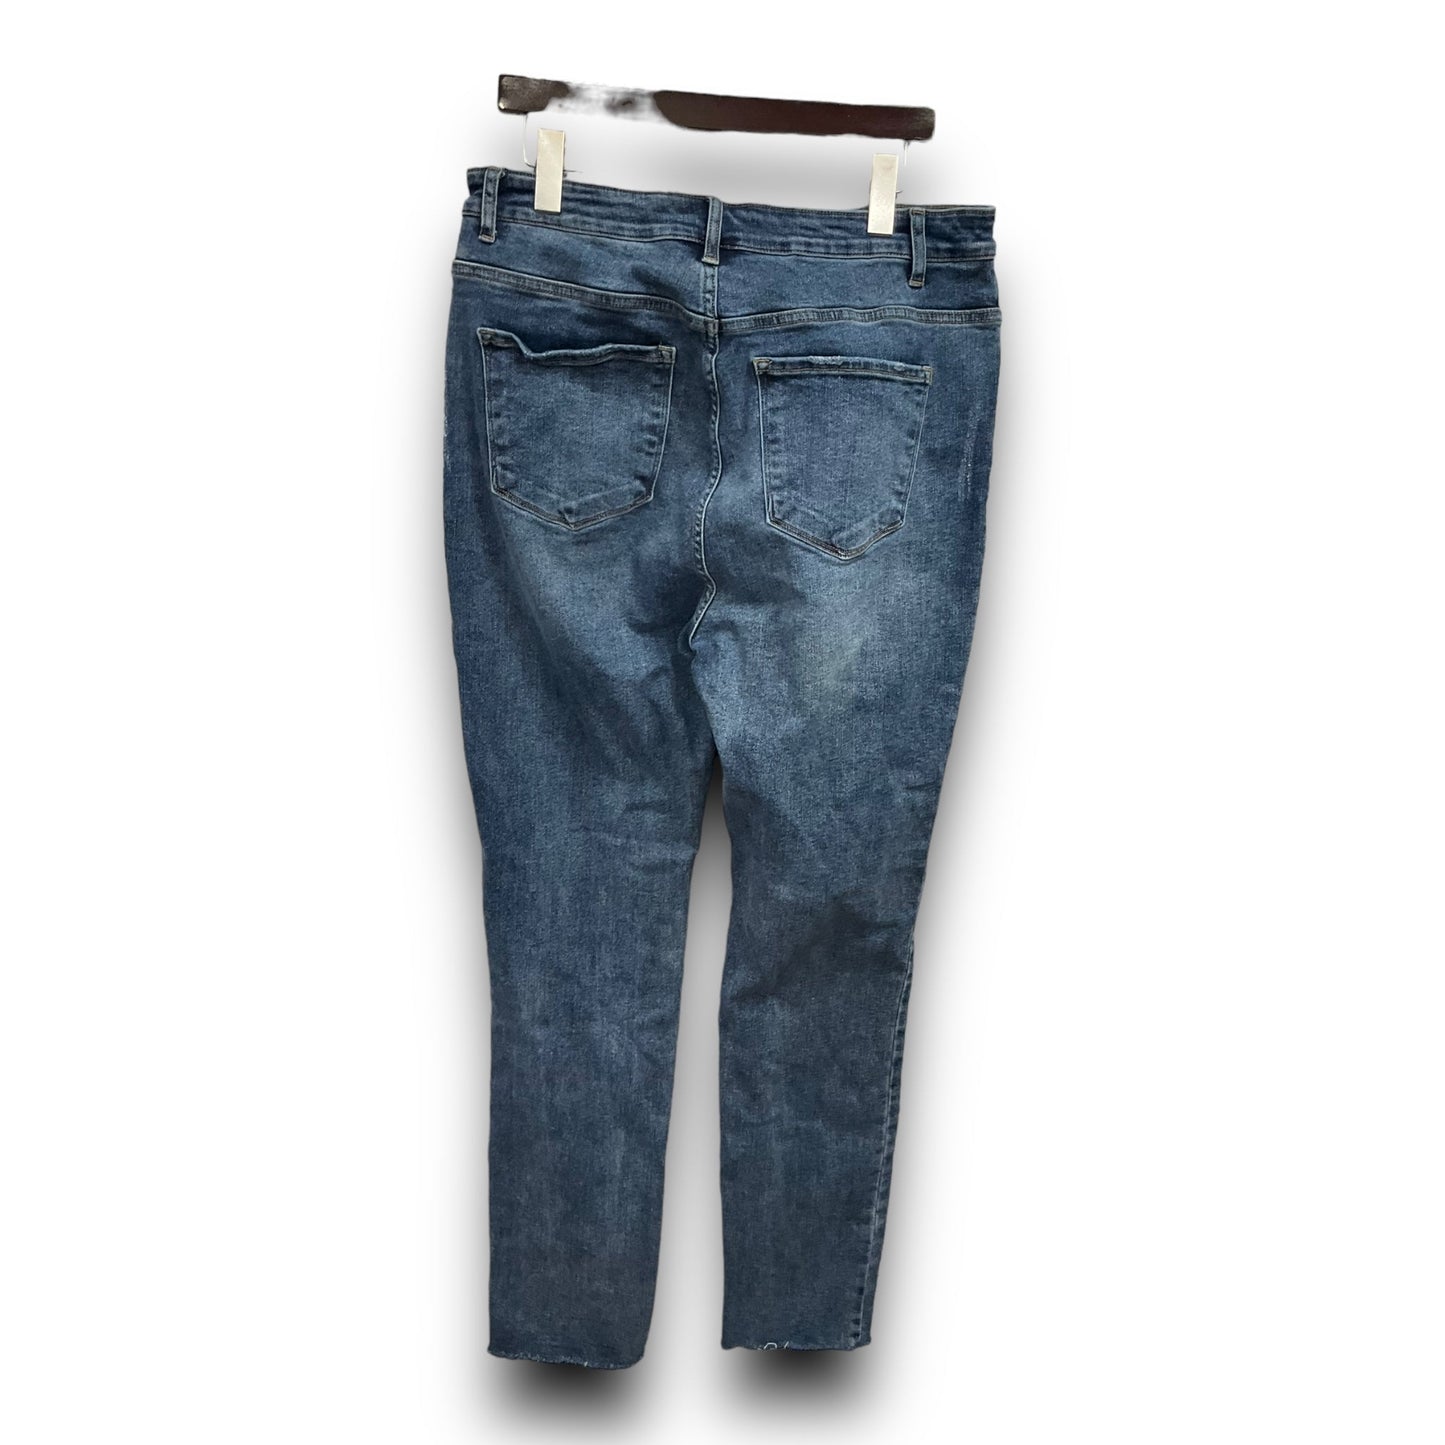 Jeans Skinny By Risen  Size: 2x